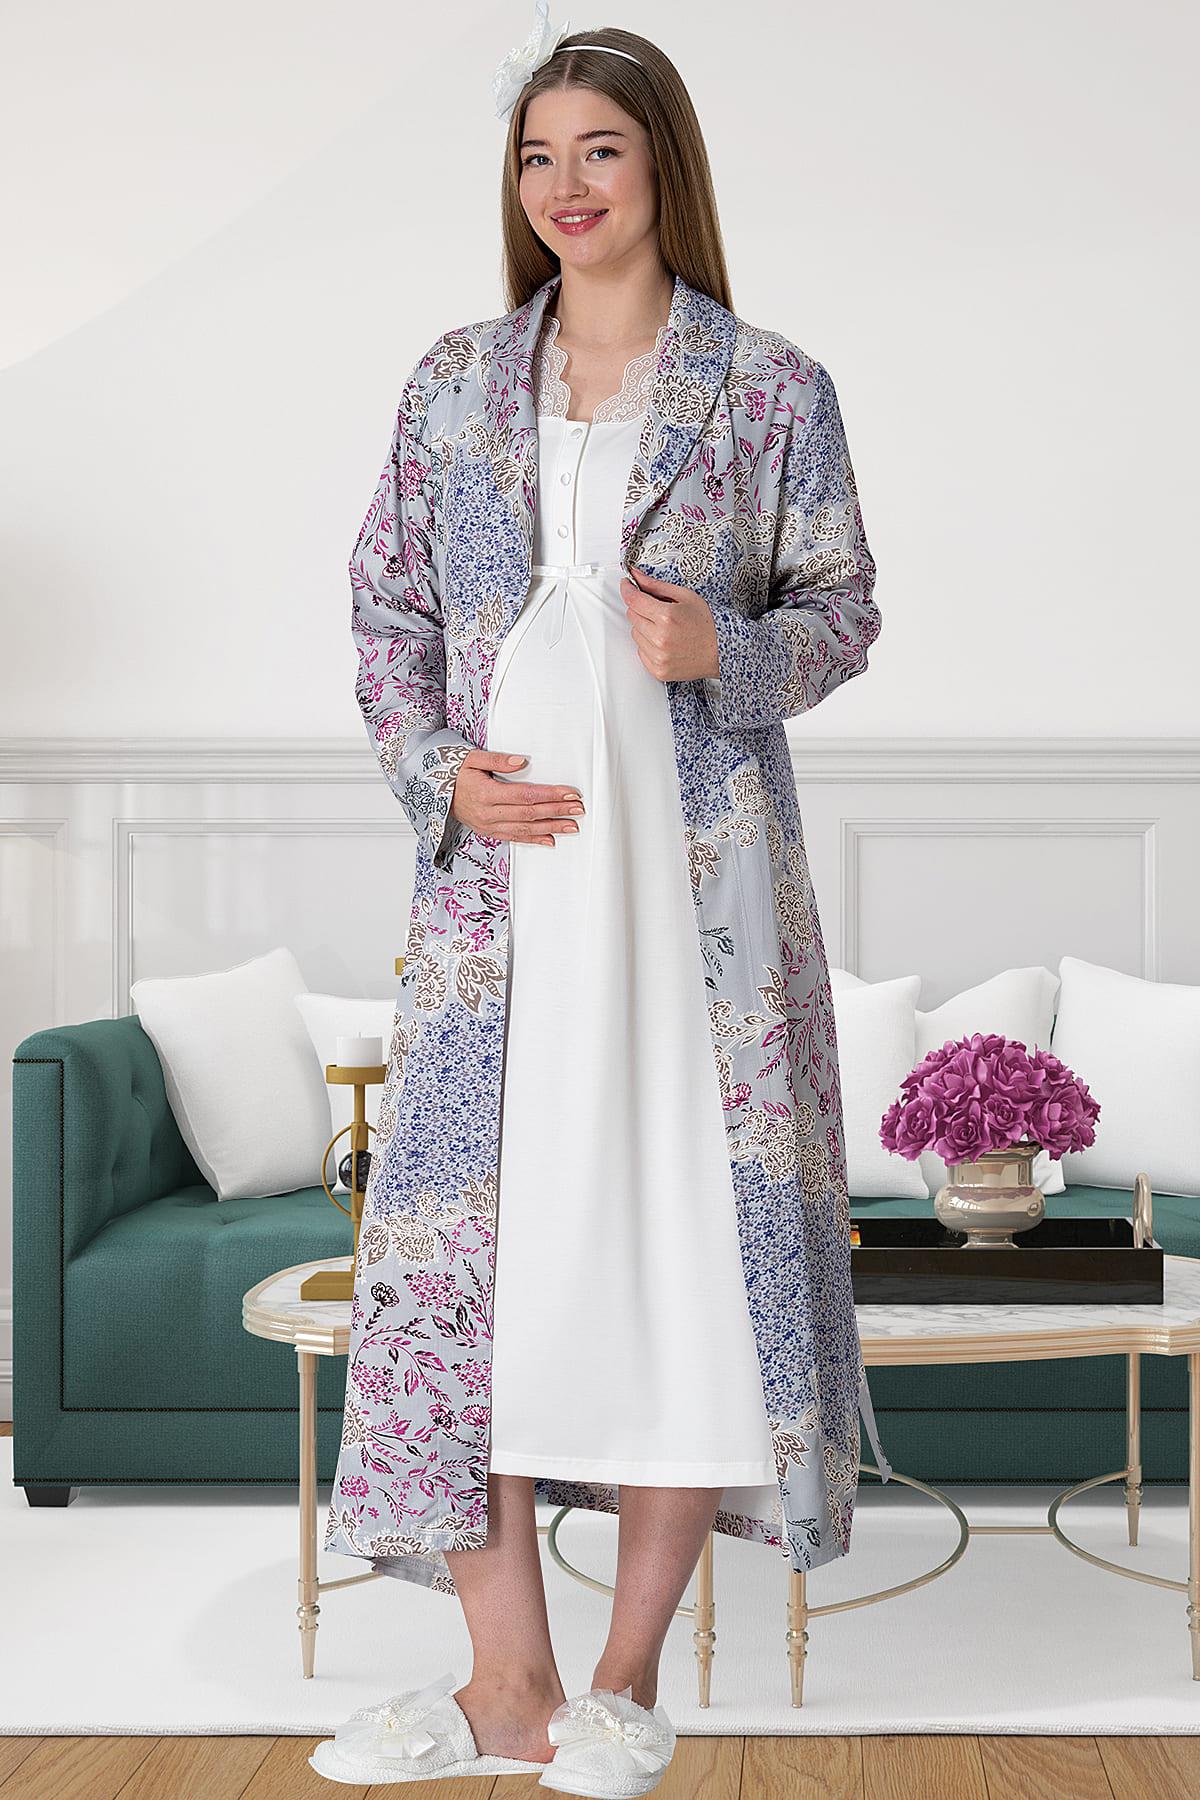 Lace Collar Maternity & Nursing Nightgown With Patterned Robe Grey - 5807